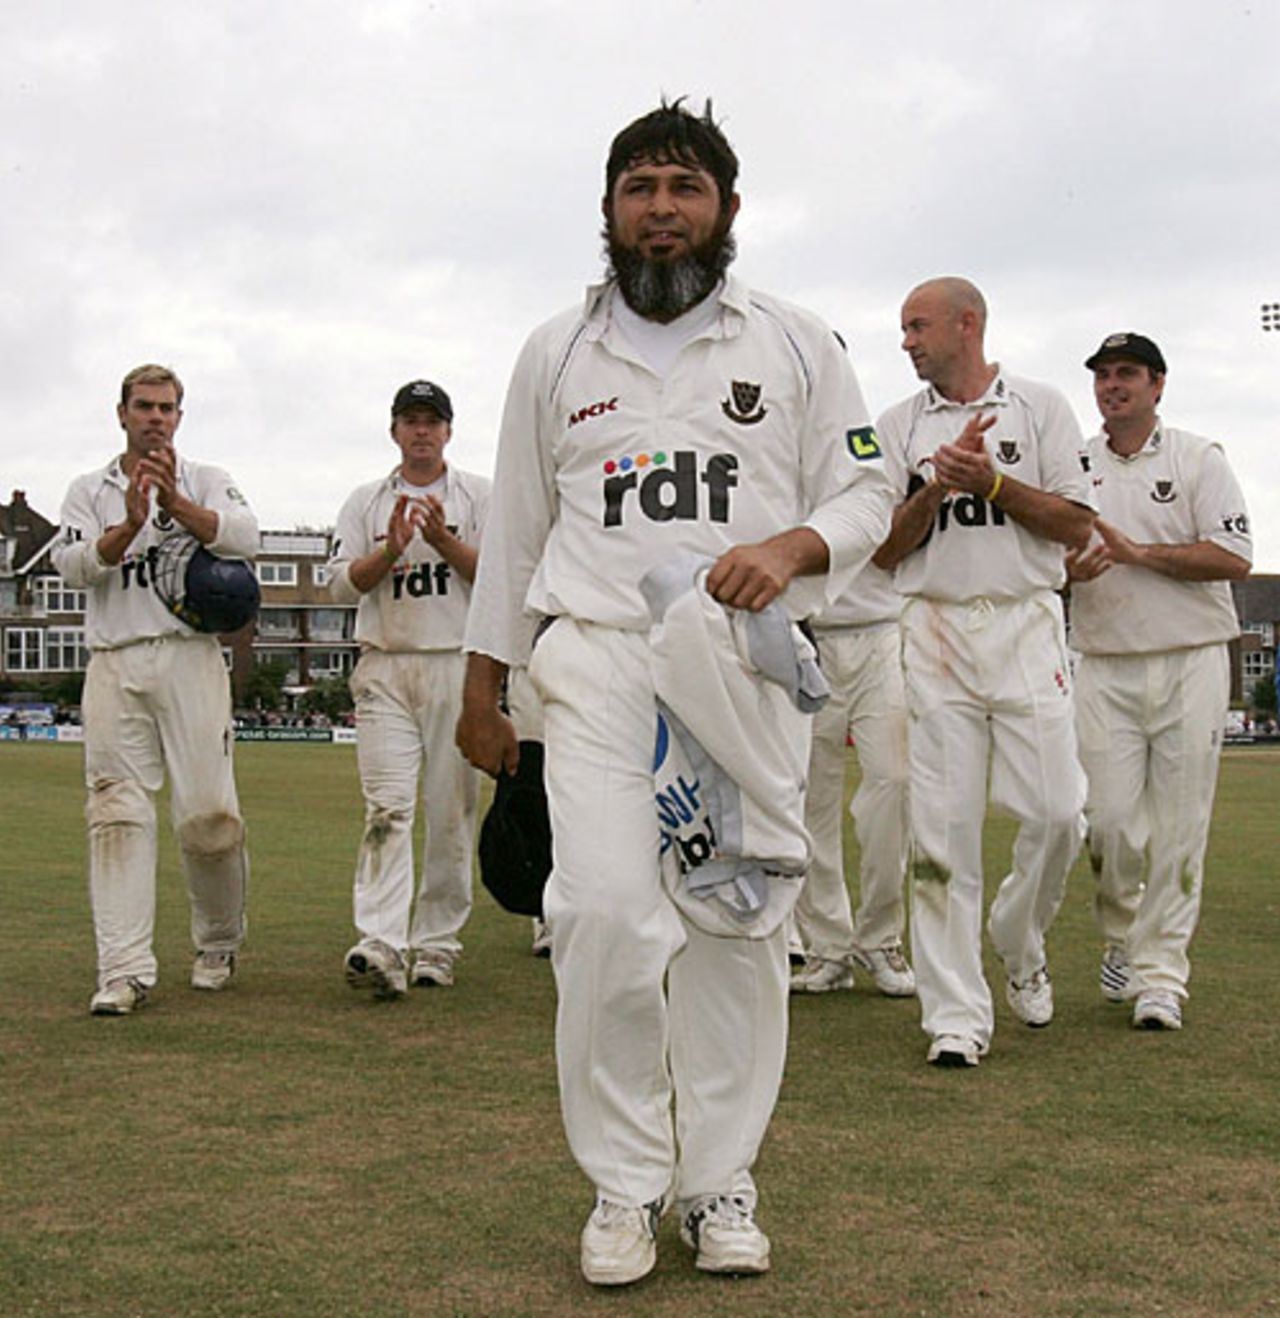 Mushtaq Ahmed leads Sussex off after taking 13 wickets in the match, Sussex v Worcestershire, Hove, September 21, 2007 